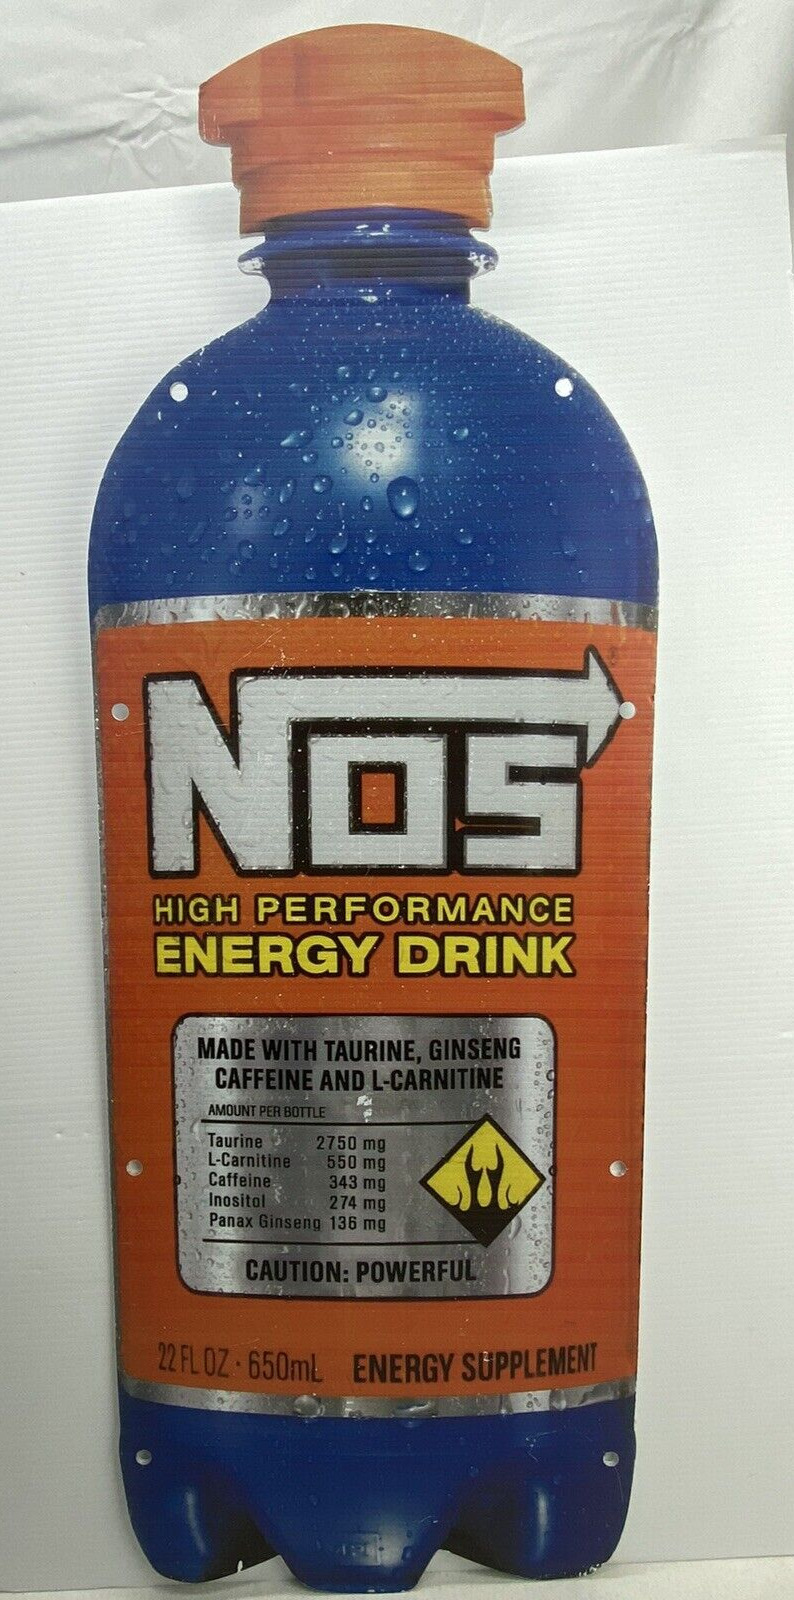 NOS High Performance Energy Drink Advertising Sign Ad Poster Plastic Coroboard